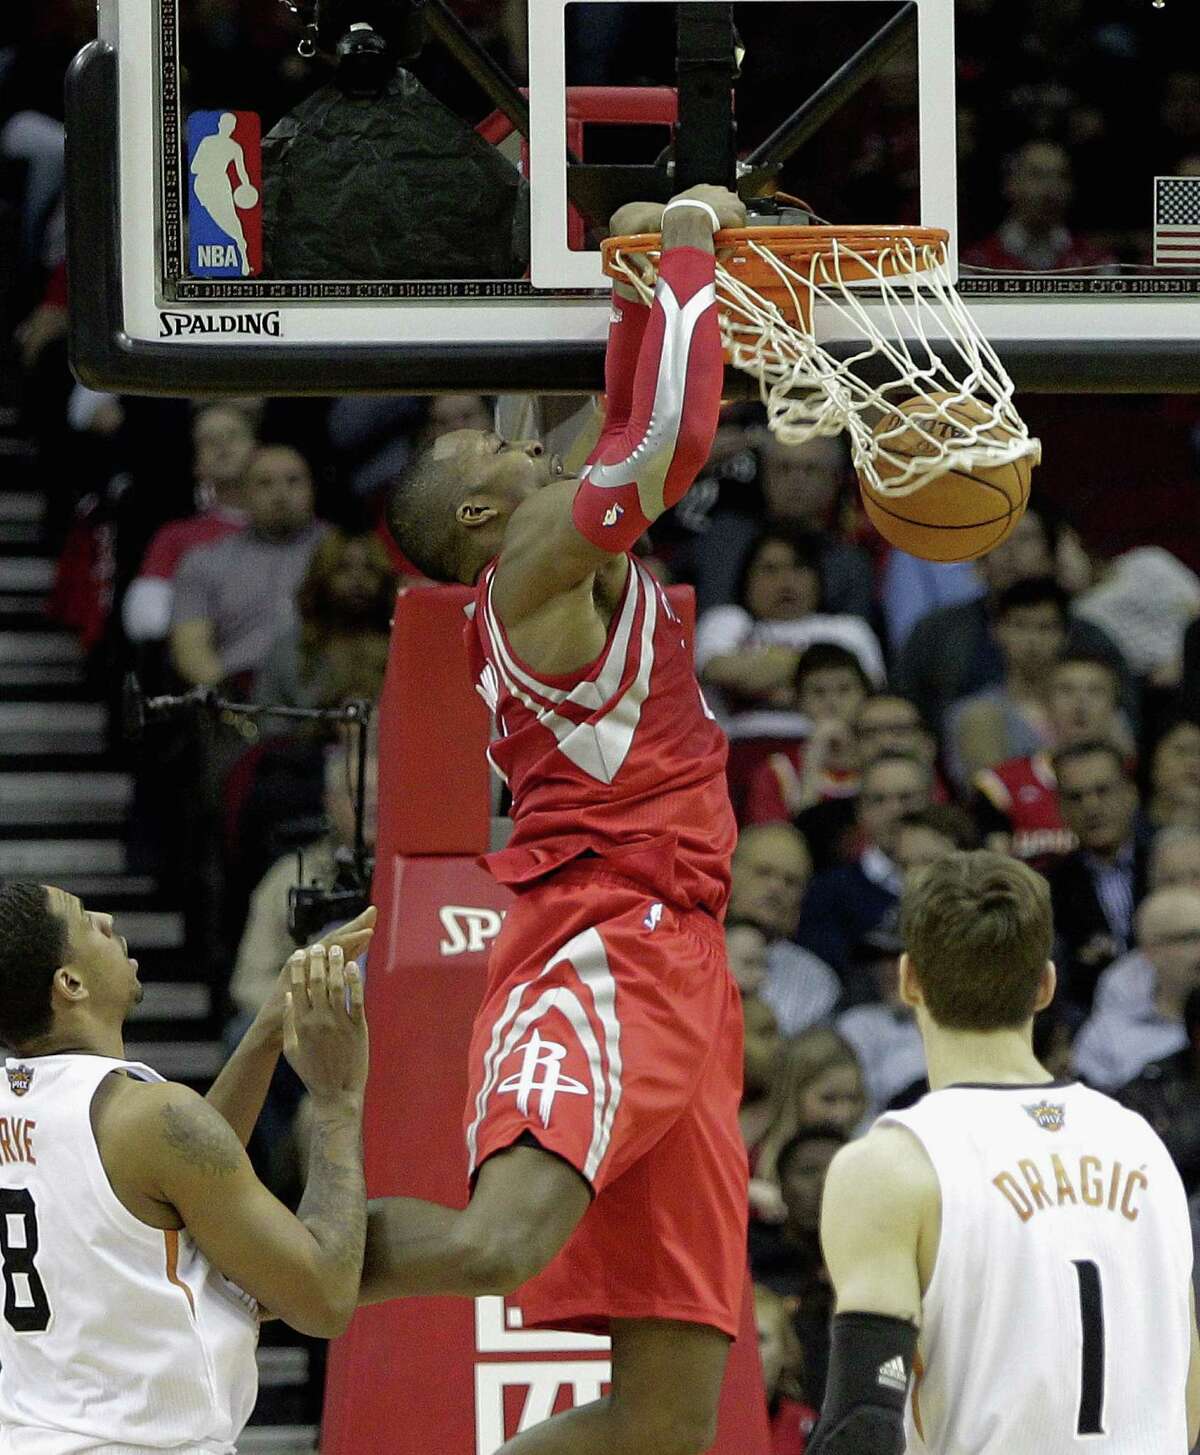 Dwight Howard dunks for two of his 34 points over Suns Channing Fry and Goran Dragic during the Rockets' win in Houston. Howard added 14 rebounds.